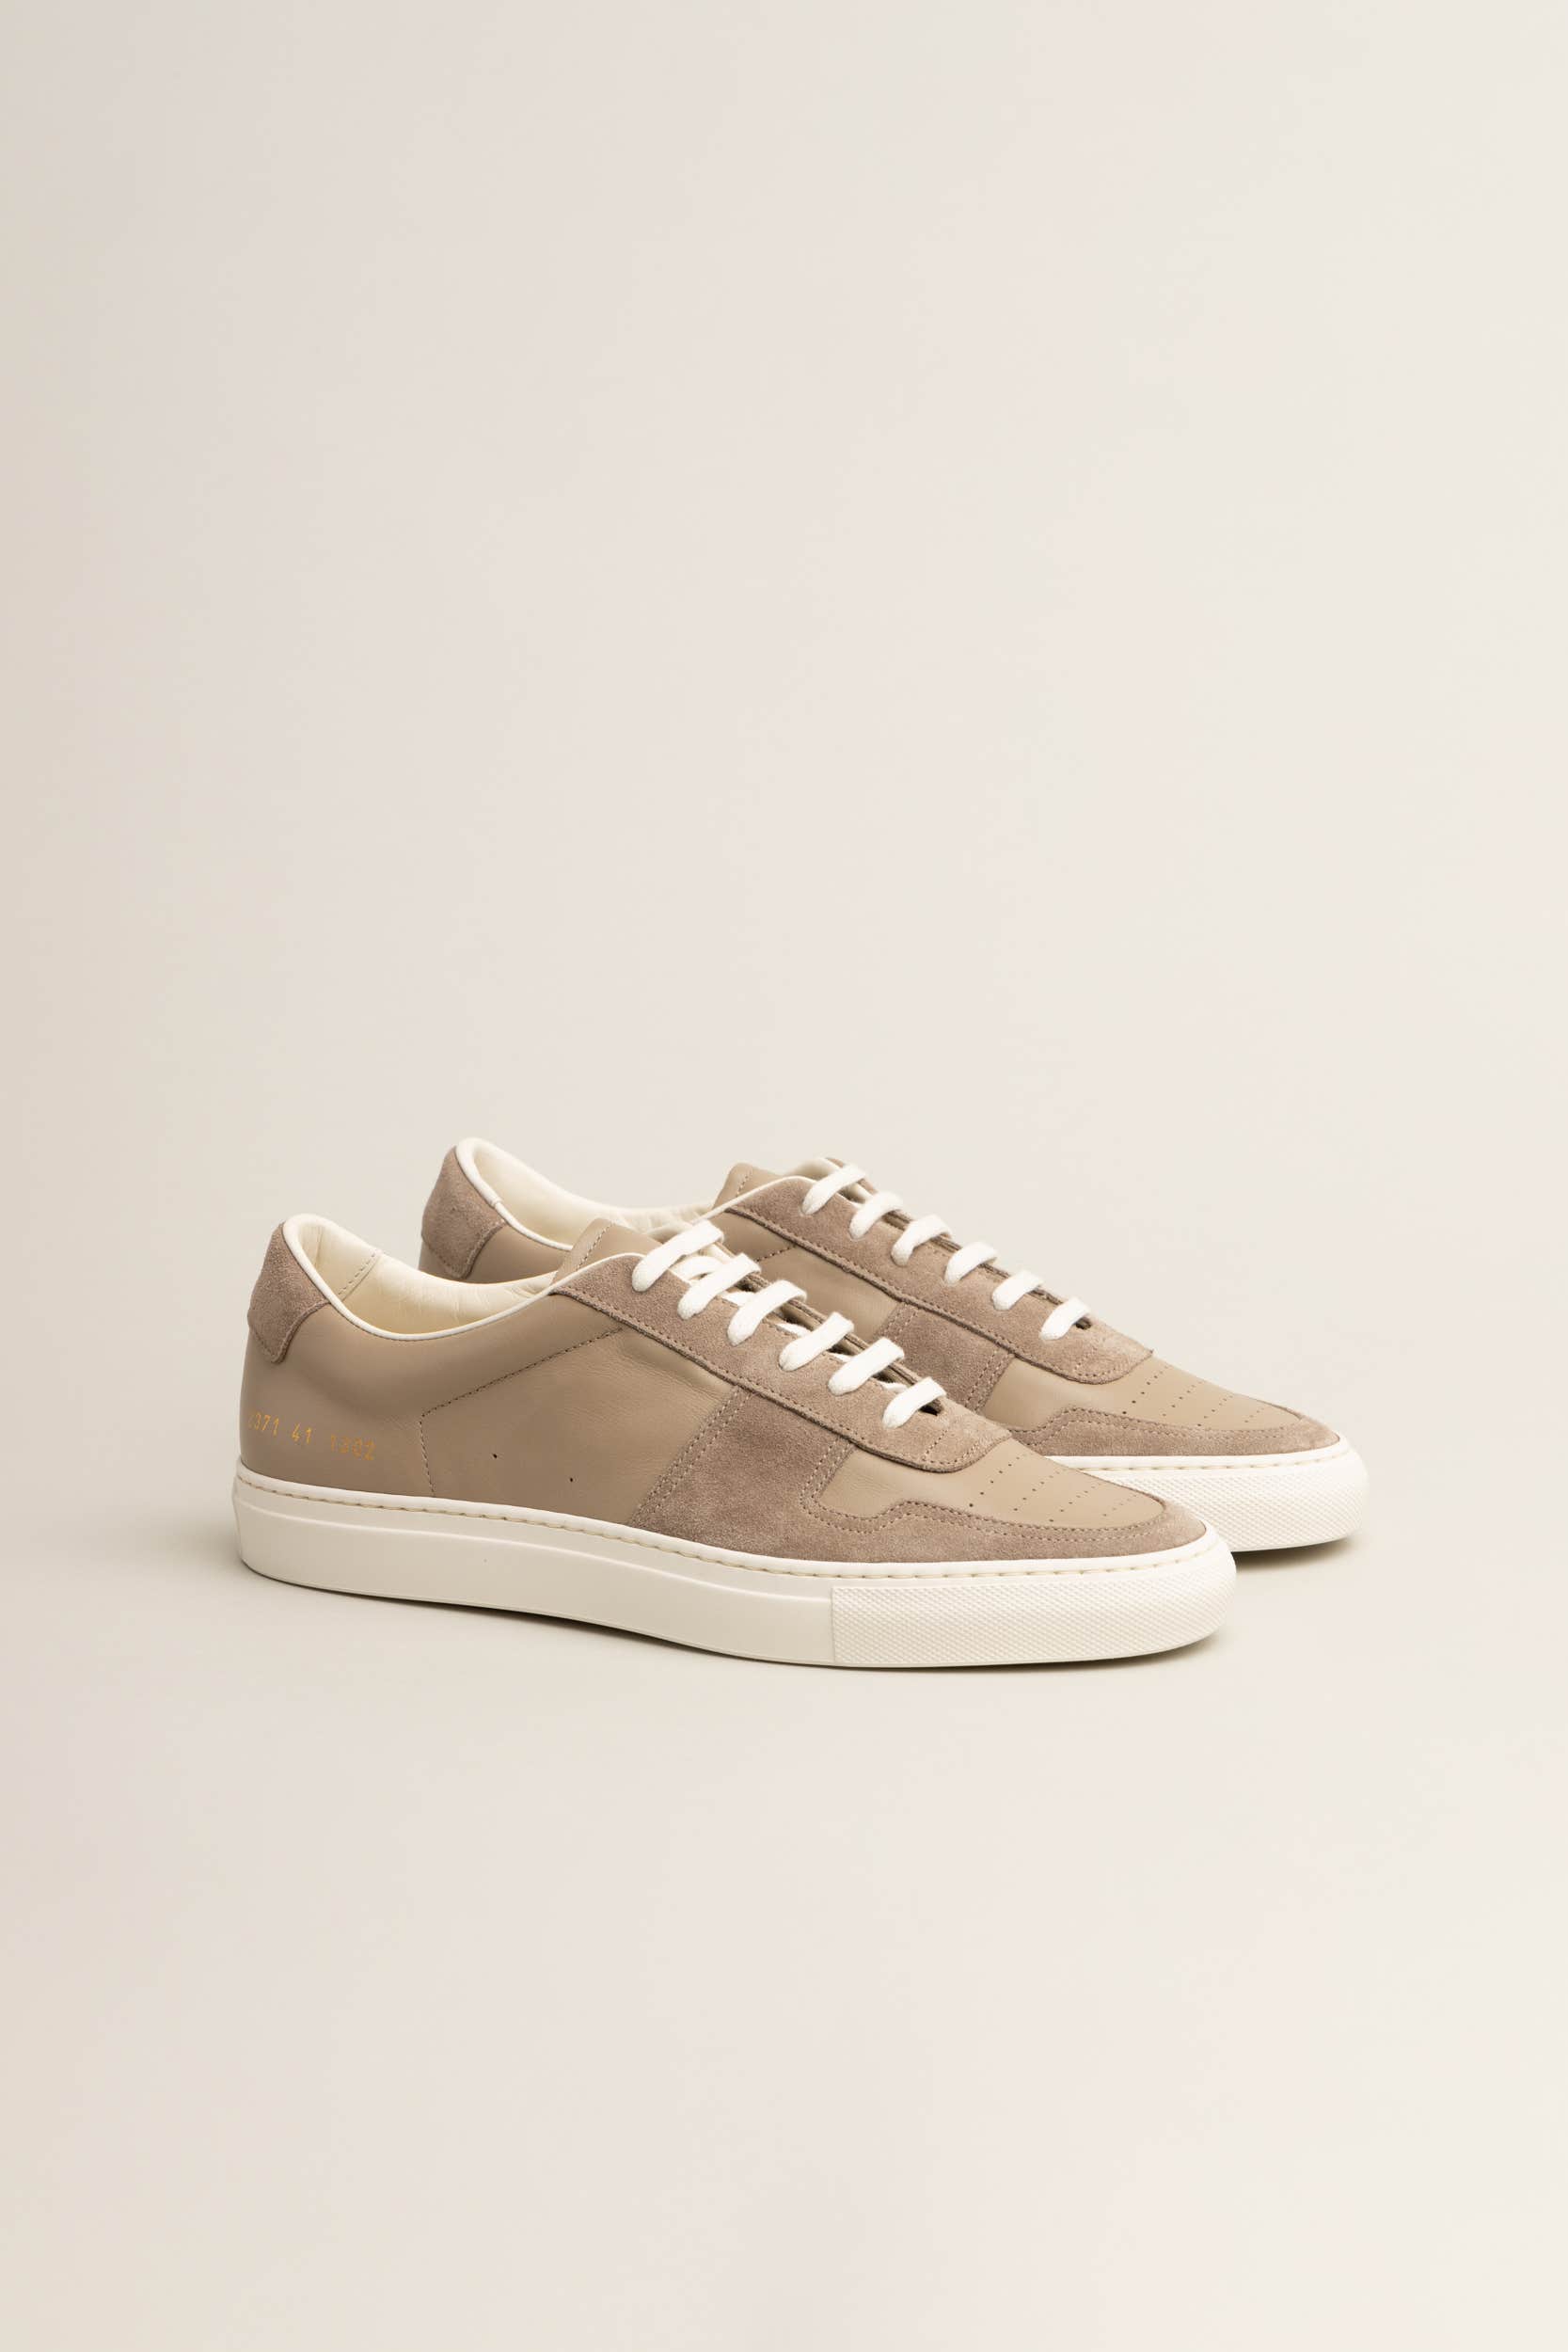 Tan Bball Suede-Trimmed Leather Sneakers